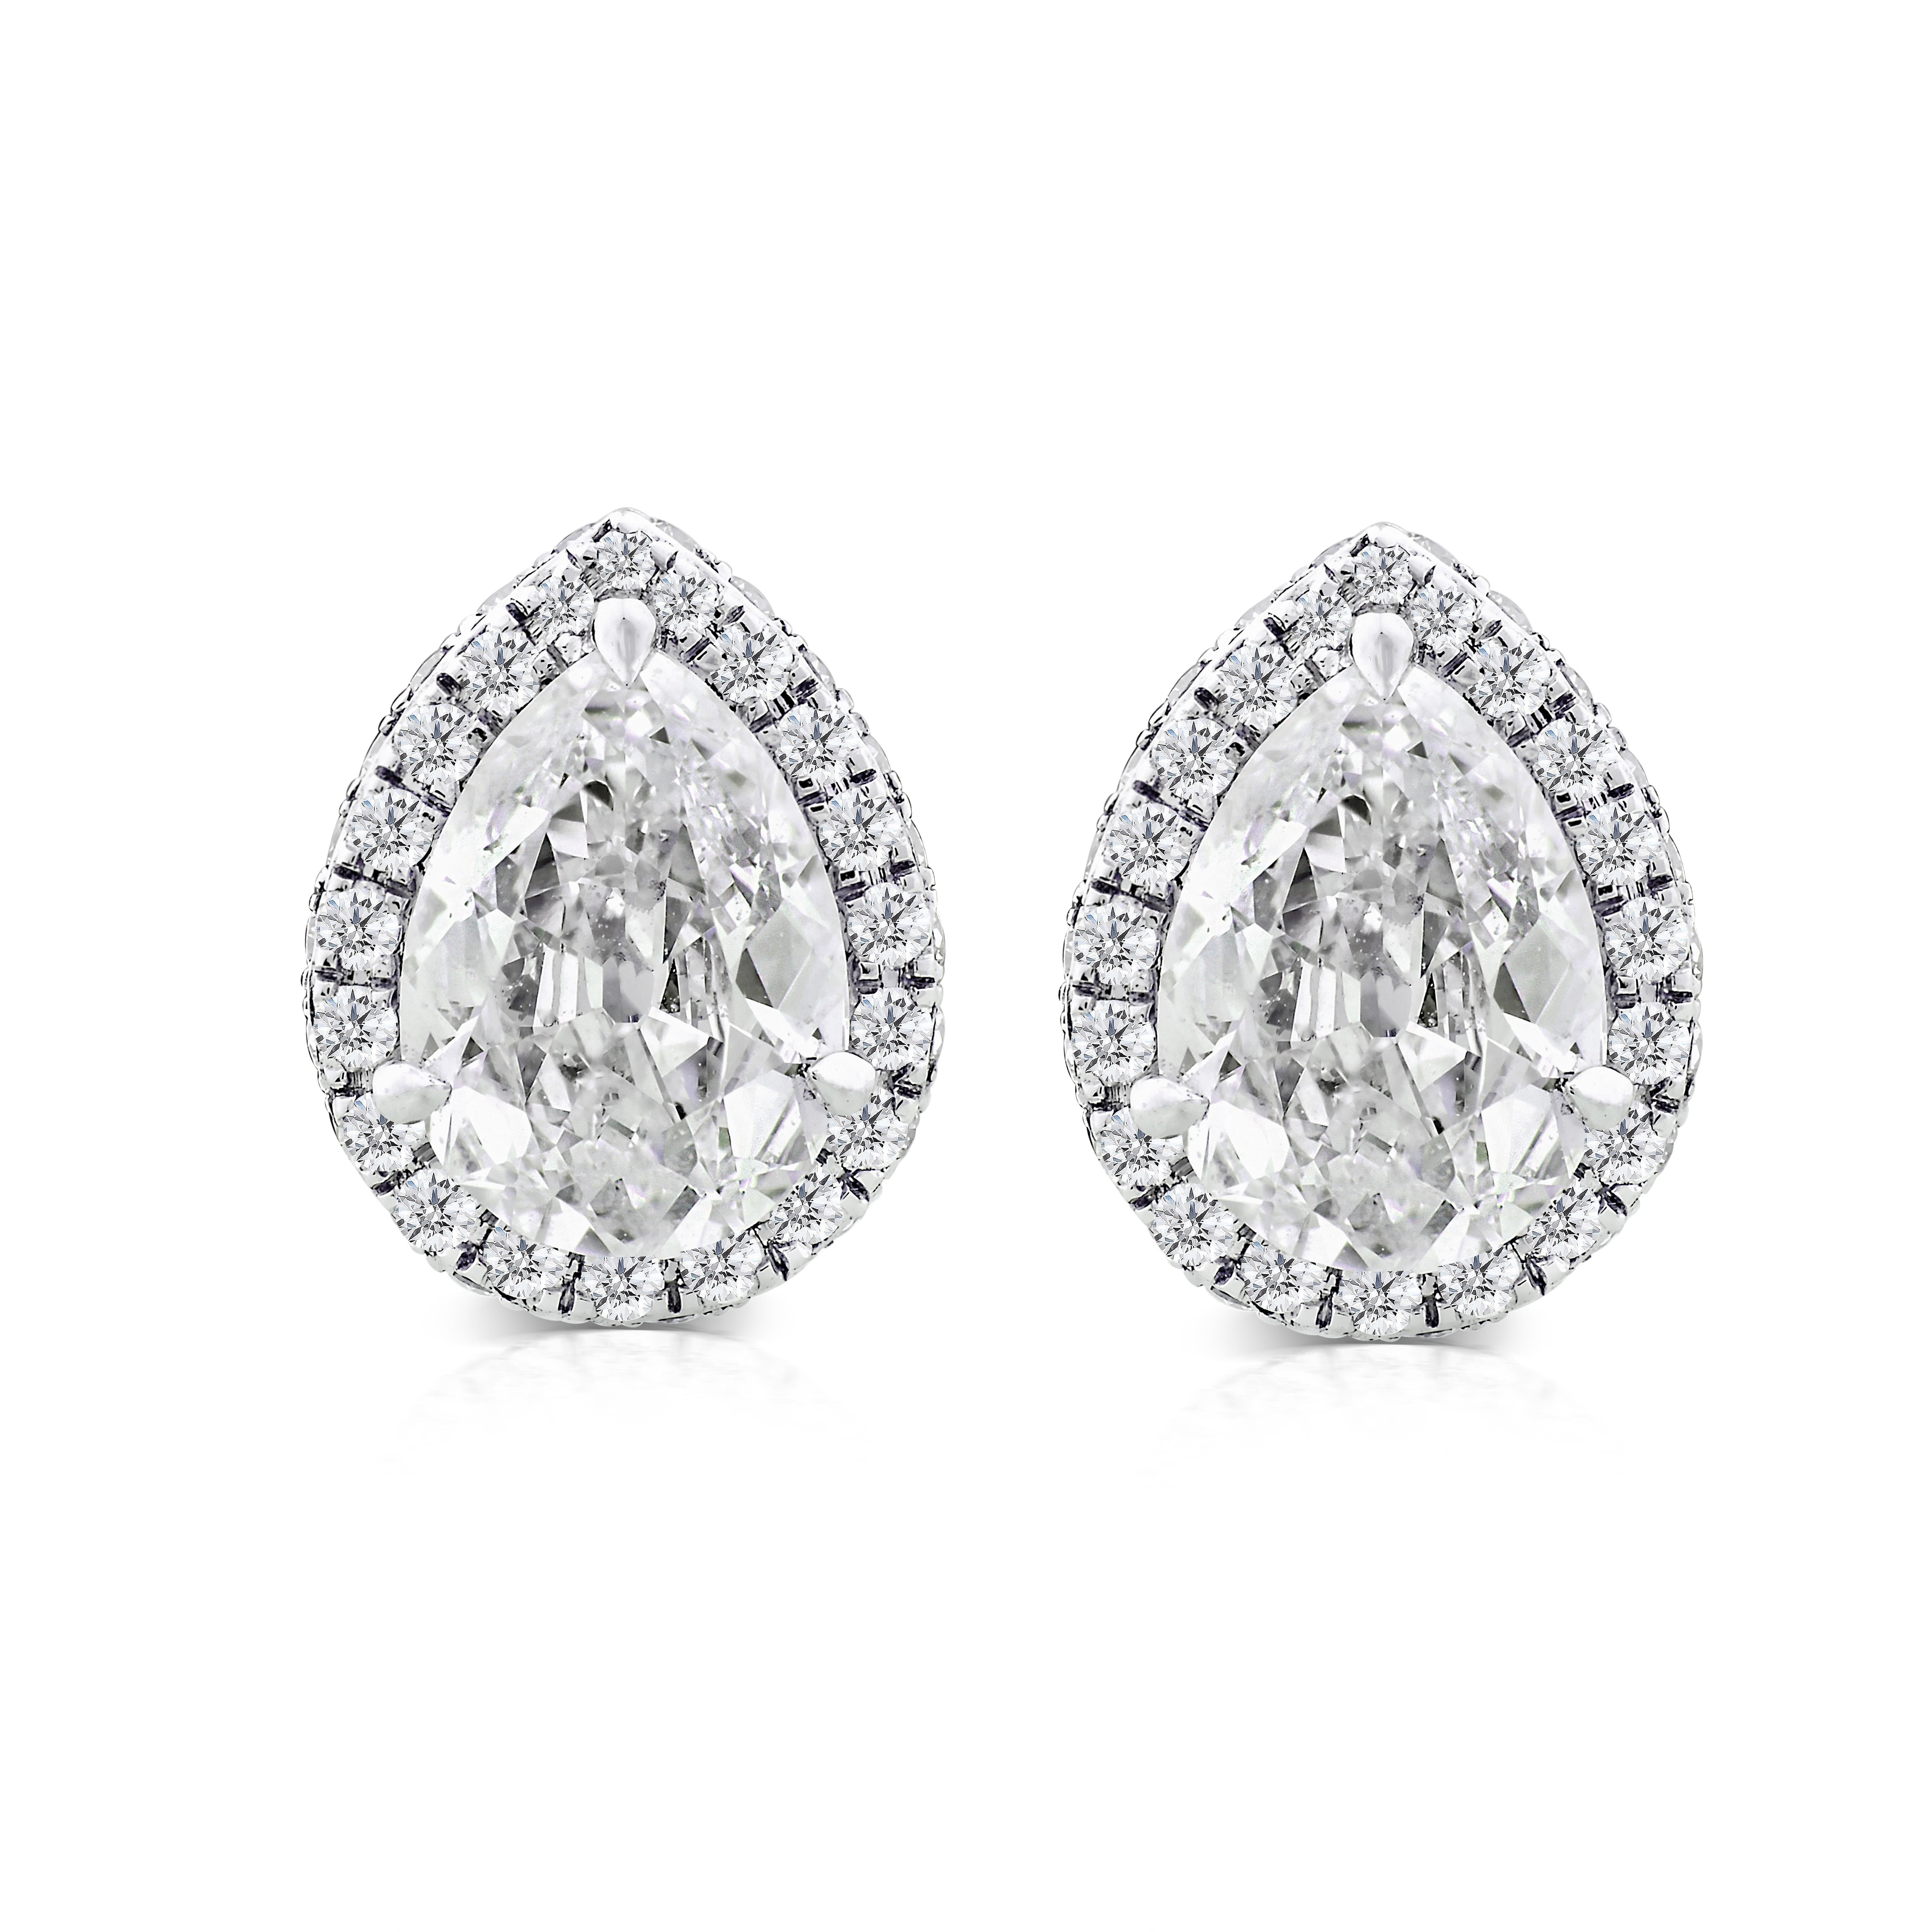 18k Gold 1.57 Ct Old Cut Pear Diamond Halo Earrings Studs Contemporary Earrings For Sale